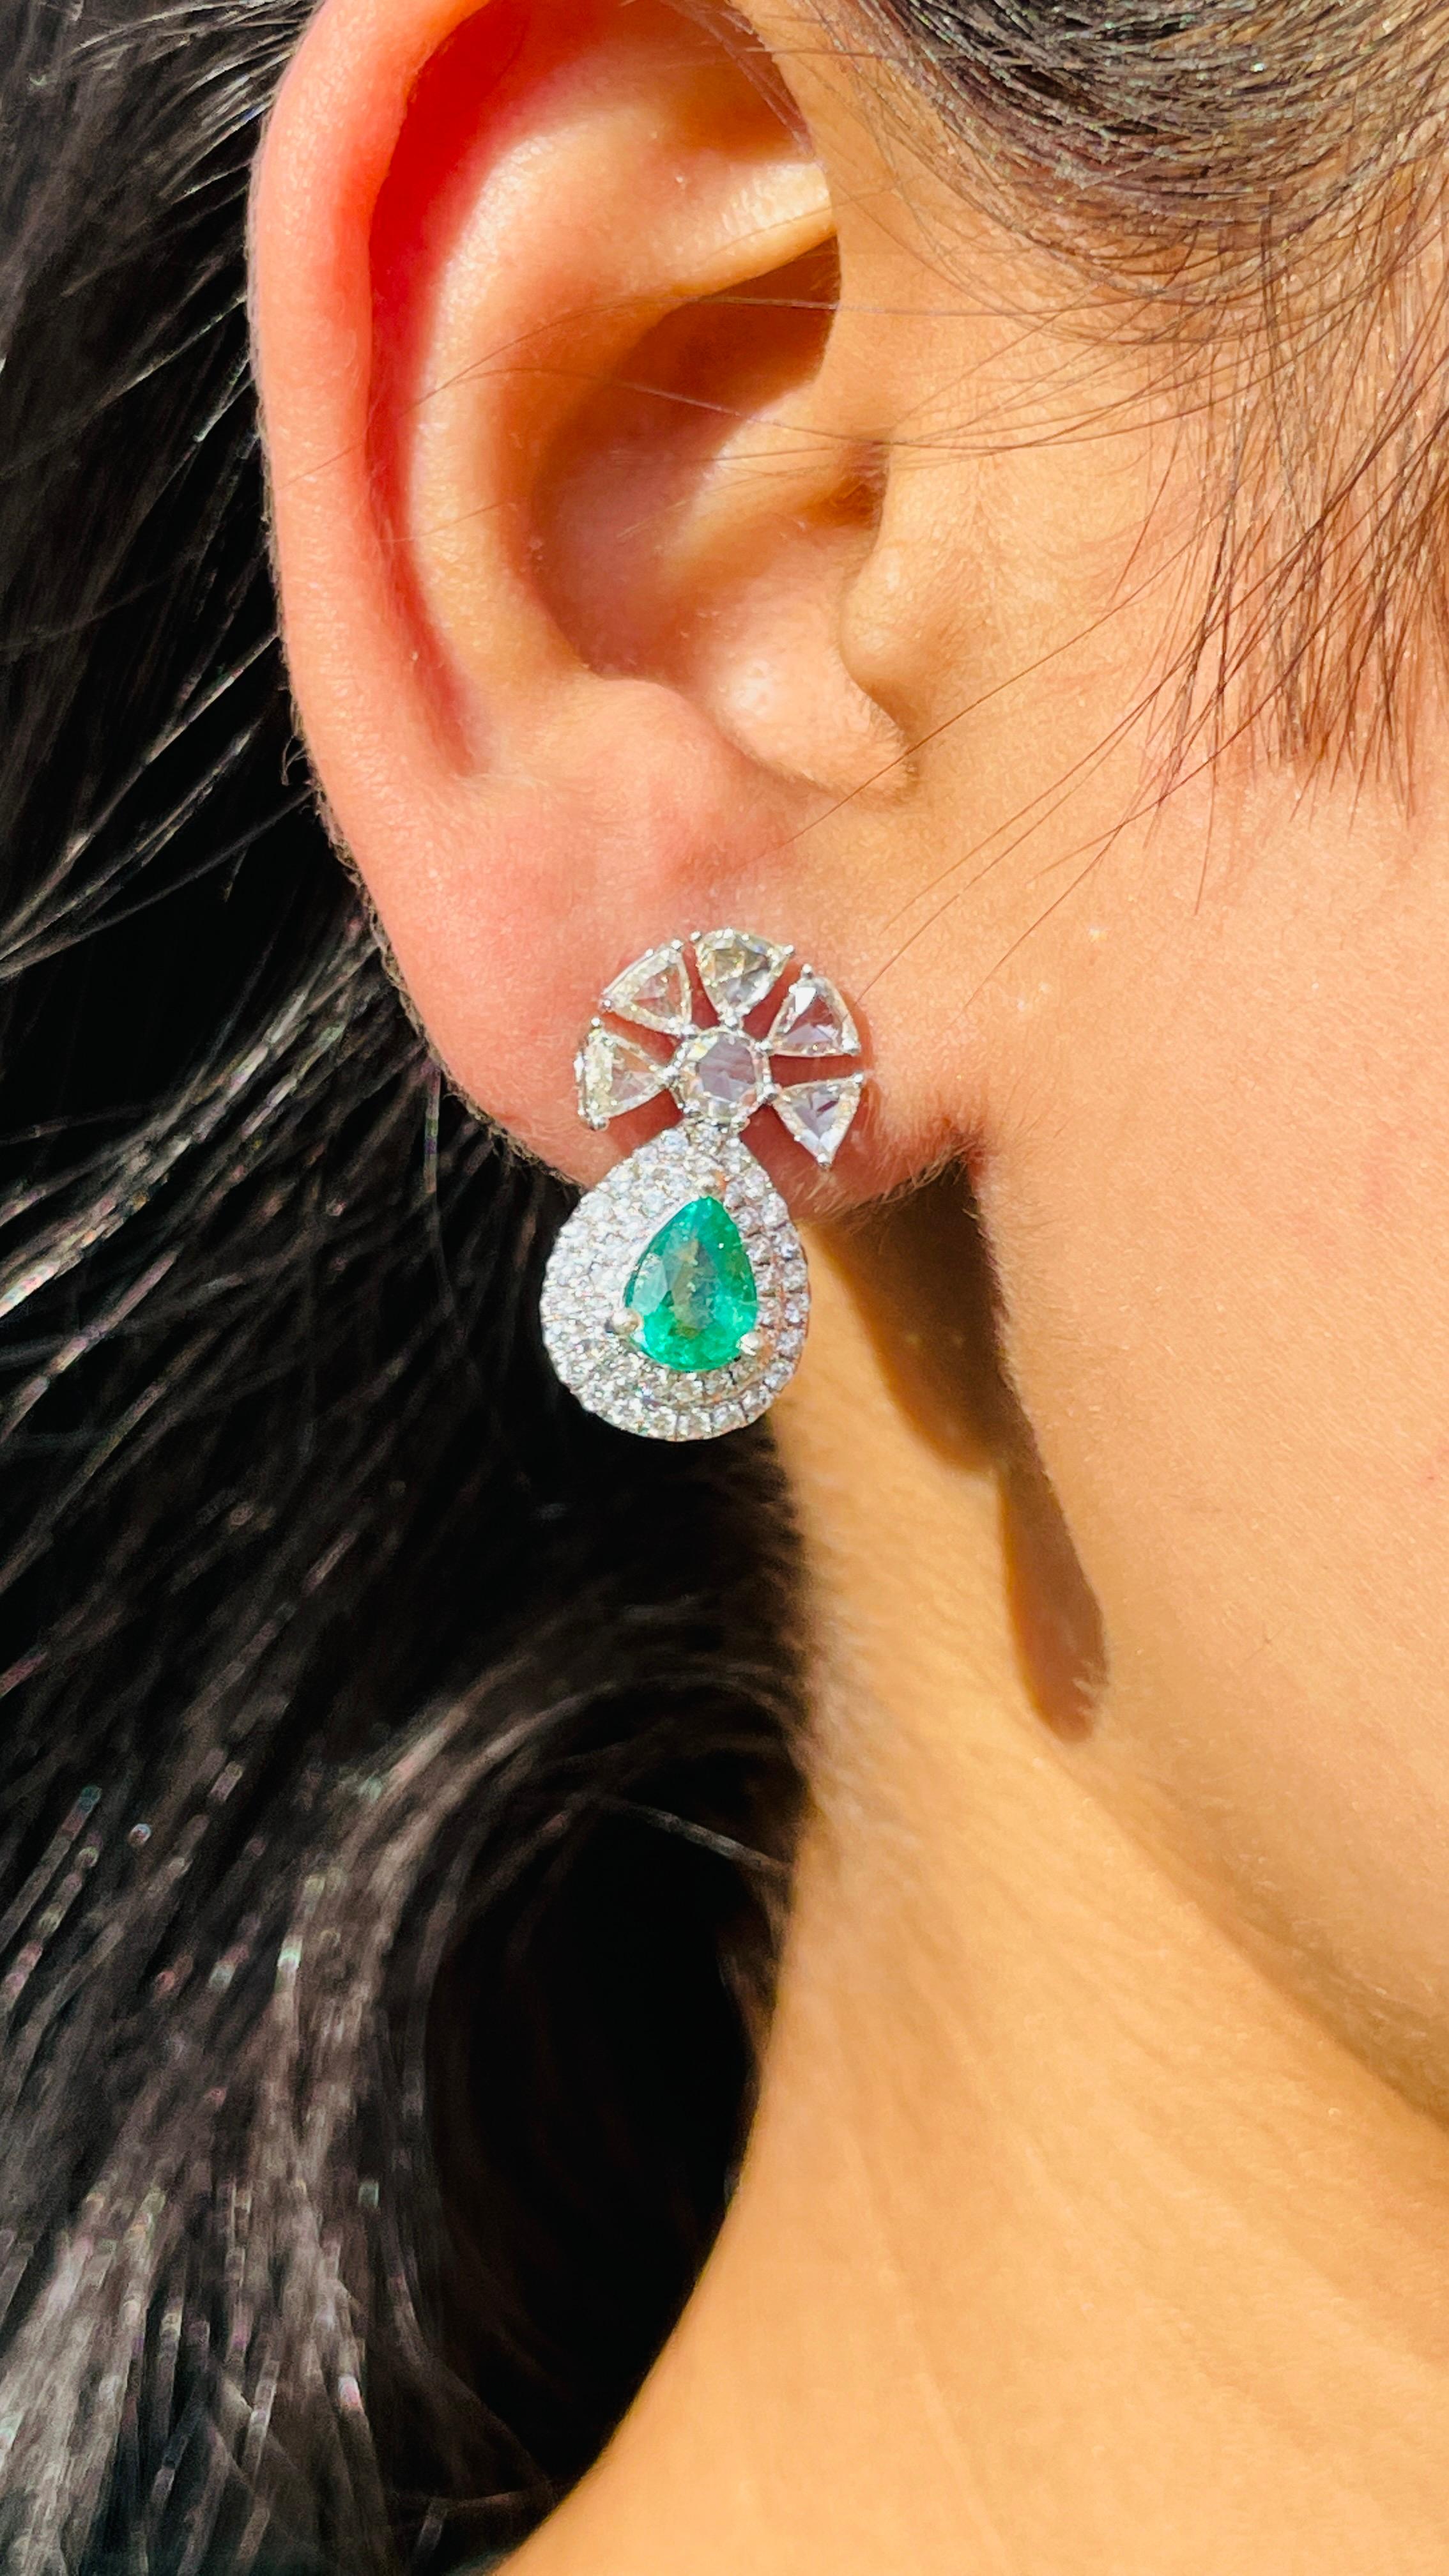 Emerald Drop earrings to make a statement with your look. These earrings create a sparkling, luxurious look featuring pear cut gemstone.
If you love to gravitate towards unique styles, this piece of jewelry is perfect for you.

PRODUCT DETAILS :-

>